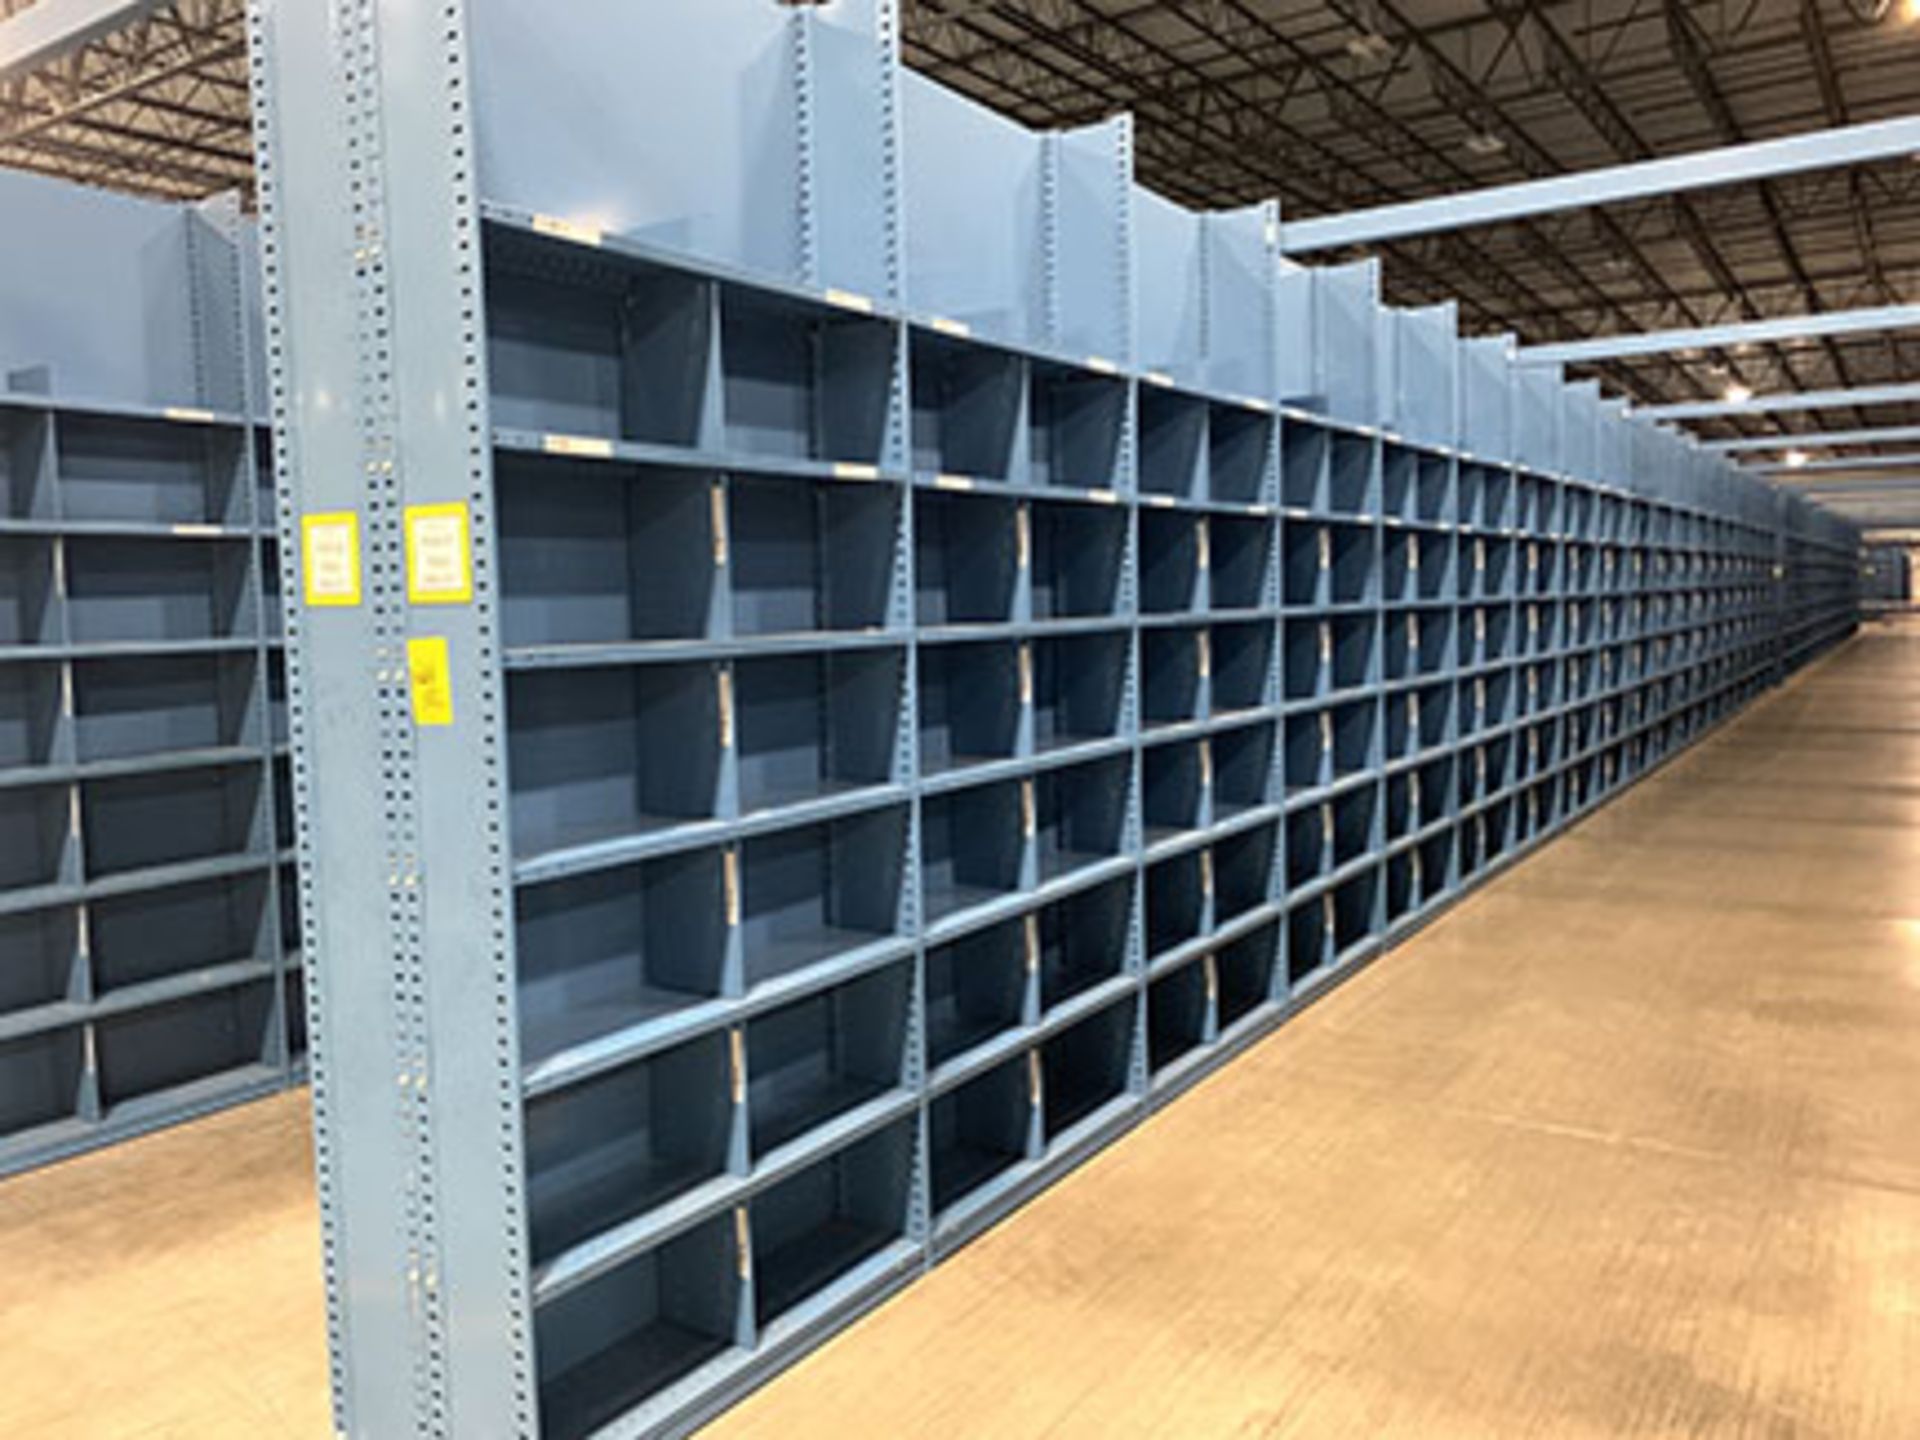 (78) SECTIONS OF HALLOWELL HI-TECH BOLTLESS SHELVING WITH DIVIDERS